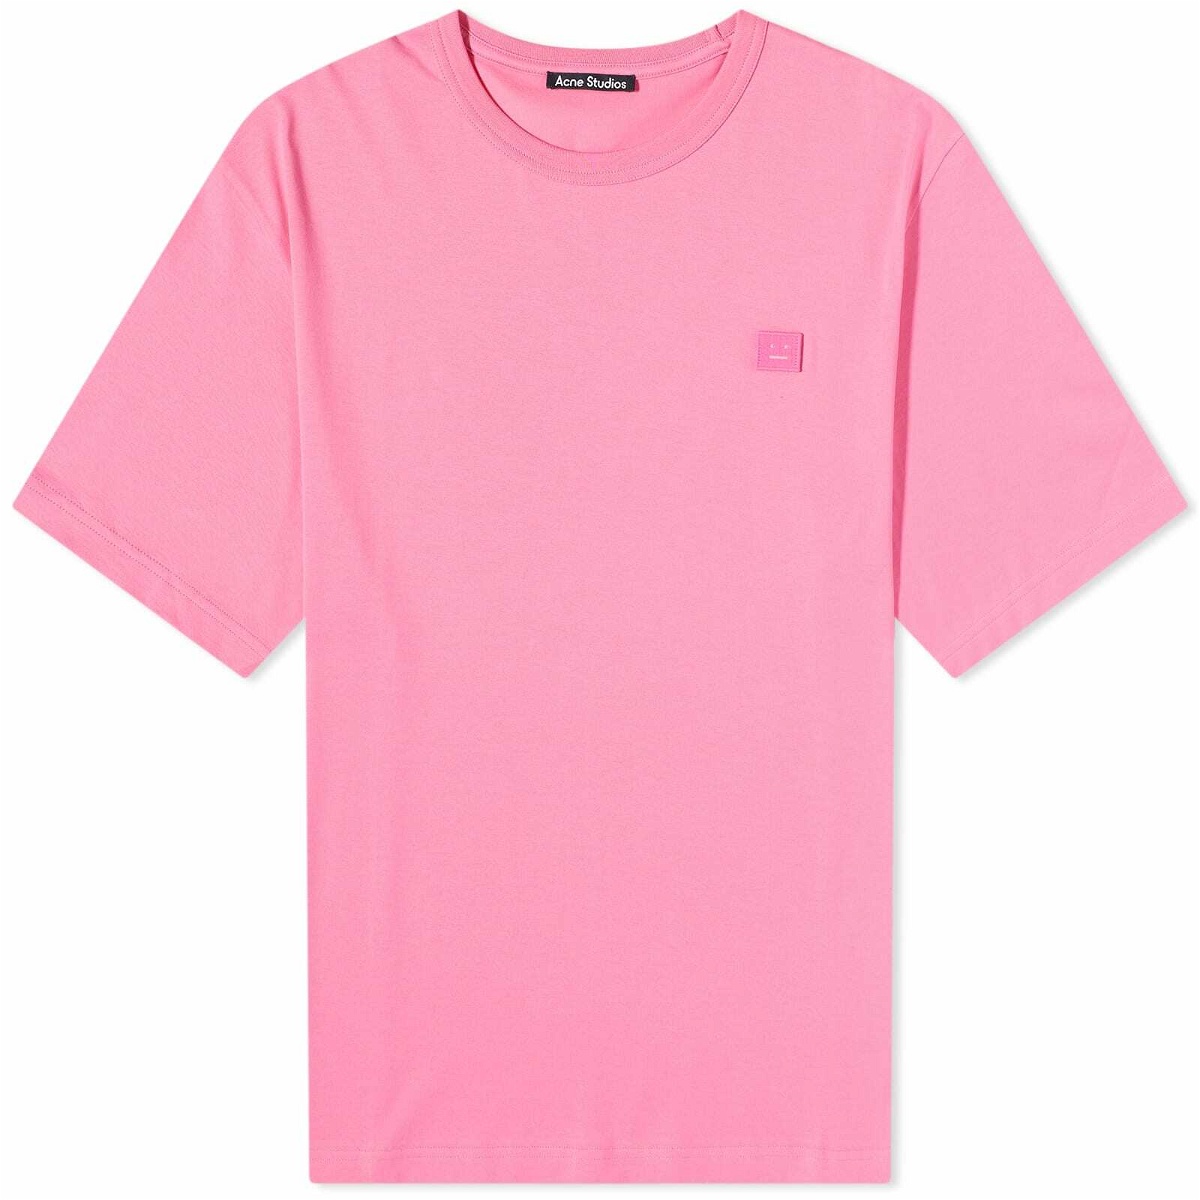 Acne Studios Exford Face T-Shirt in Bright Pink Acne Studios